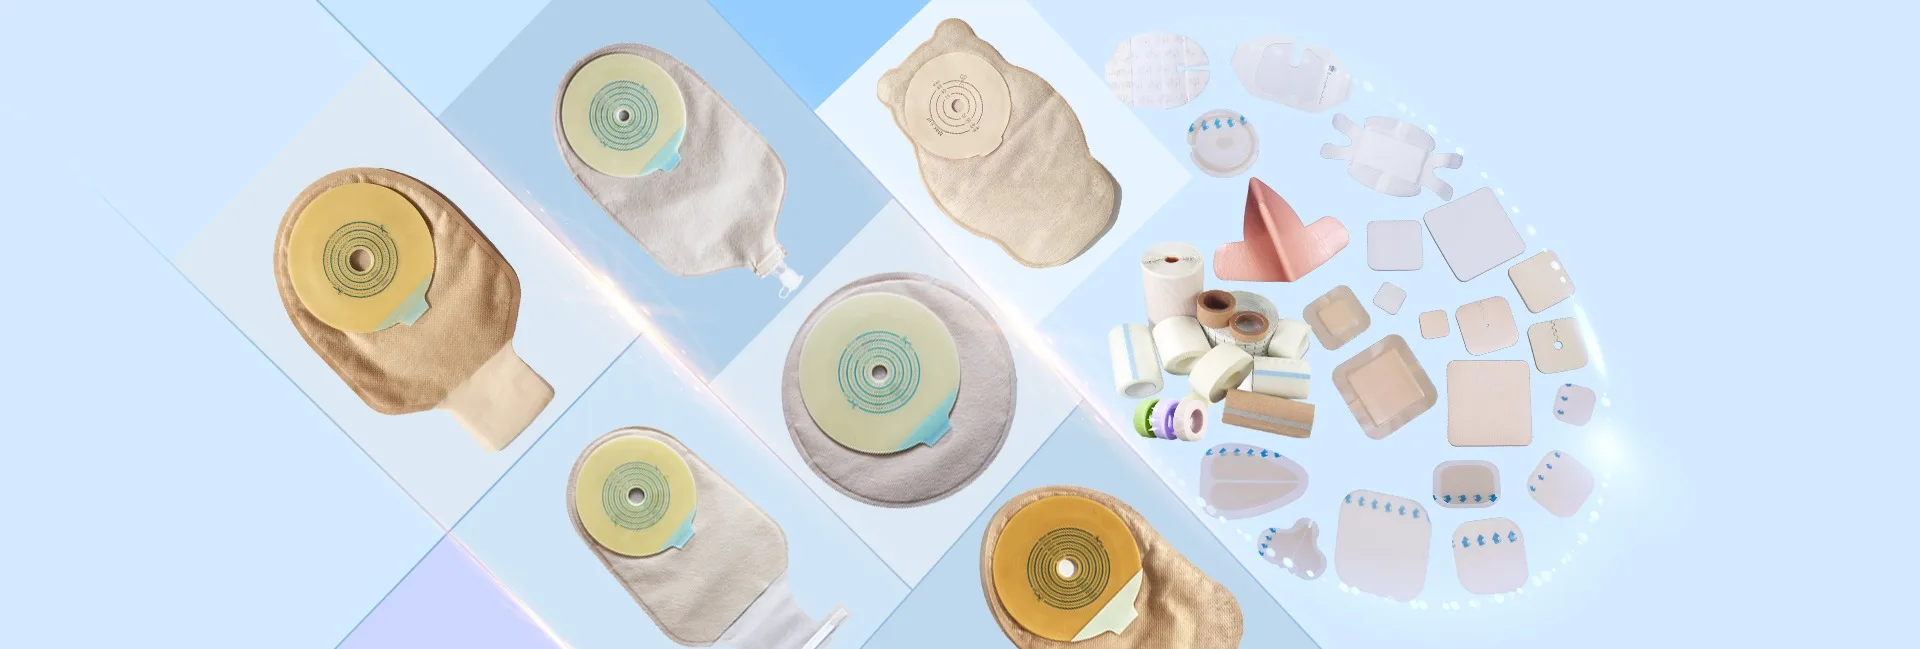 New ostomy bag technology has been launched